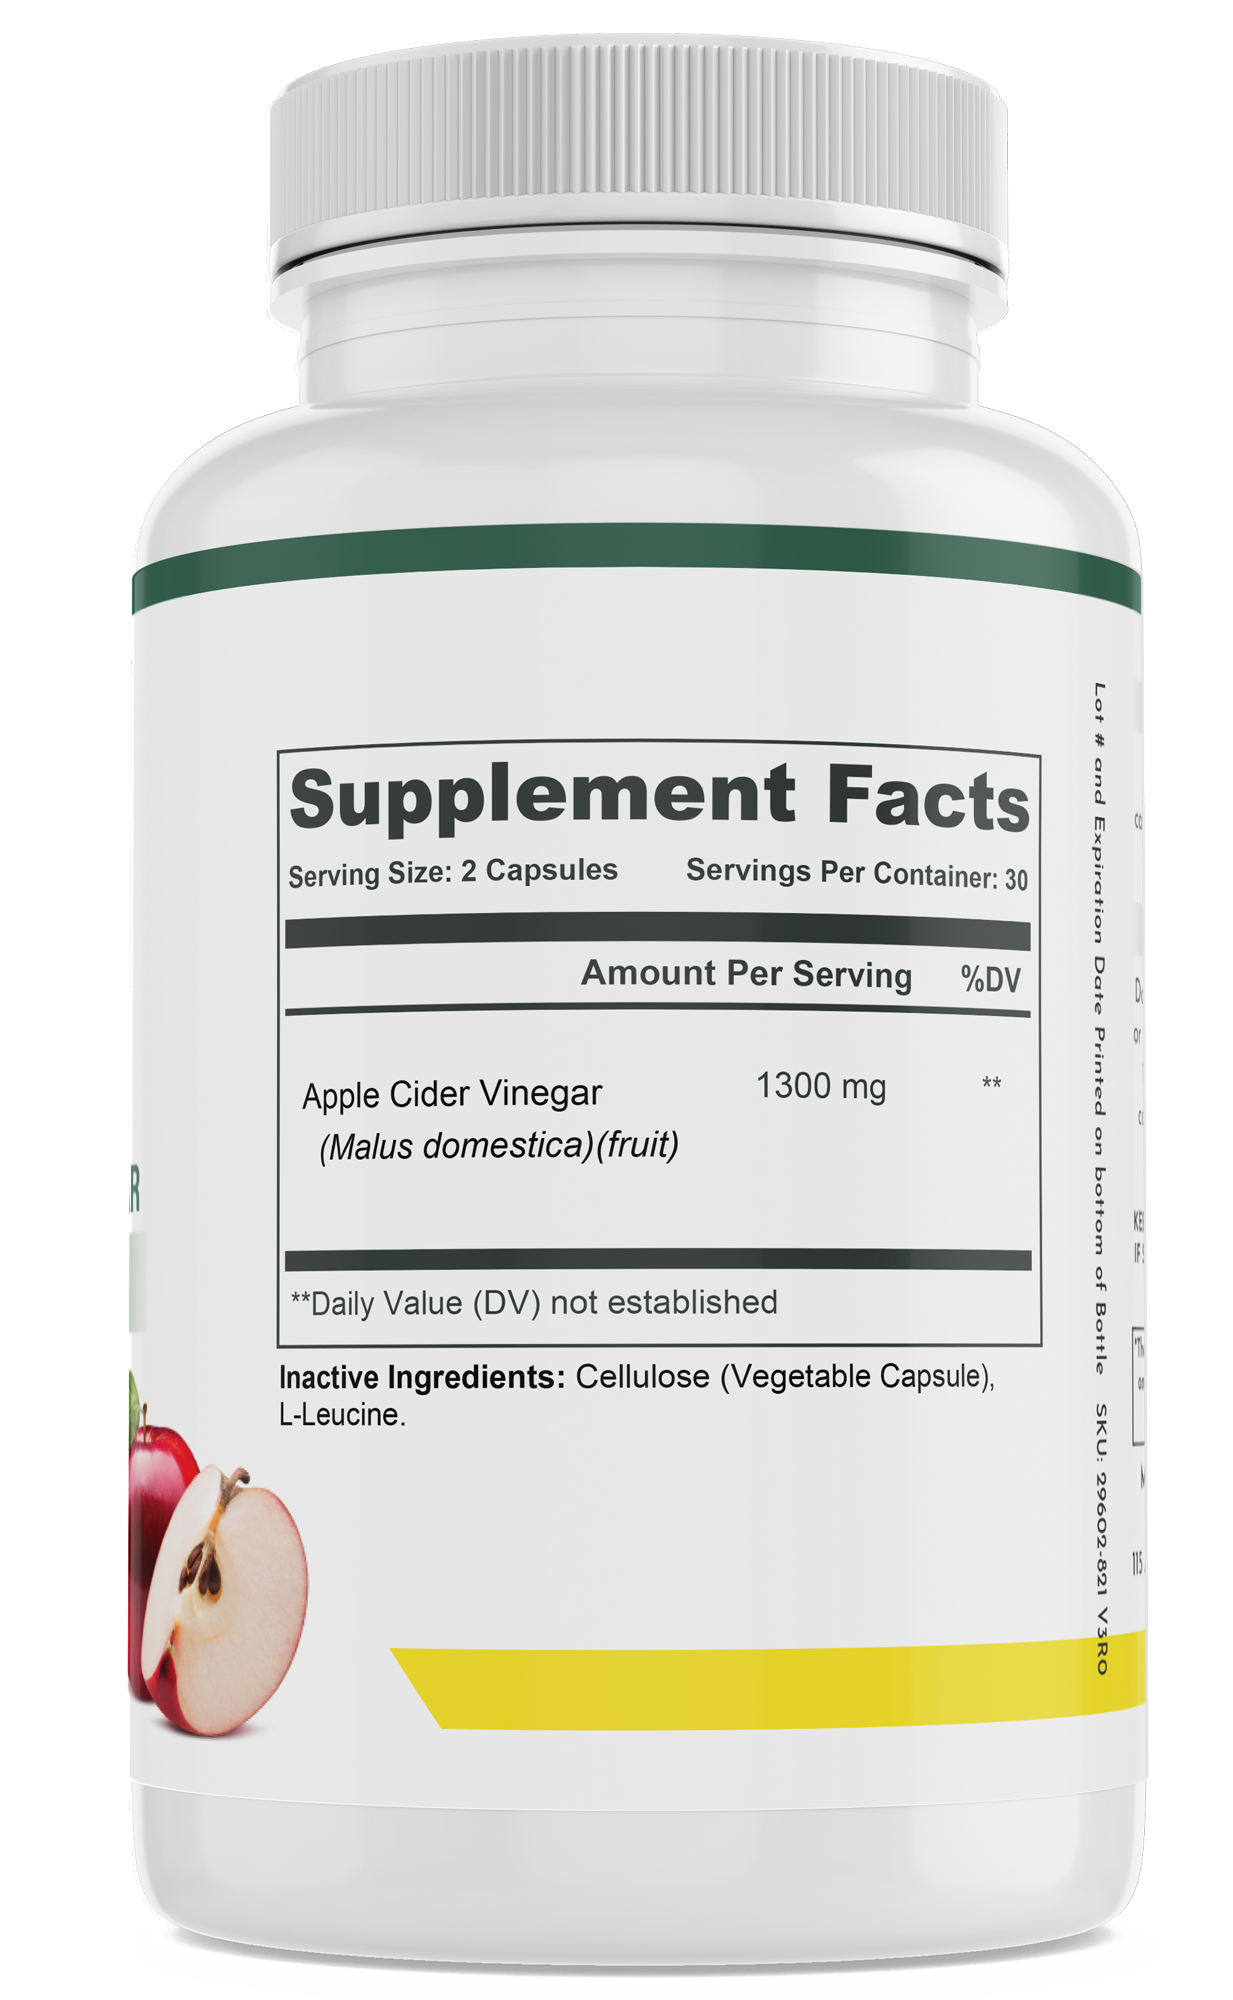 High-quality ACV supplement with natural ingredients for overall health and wellness.